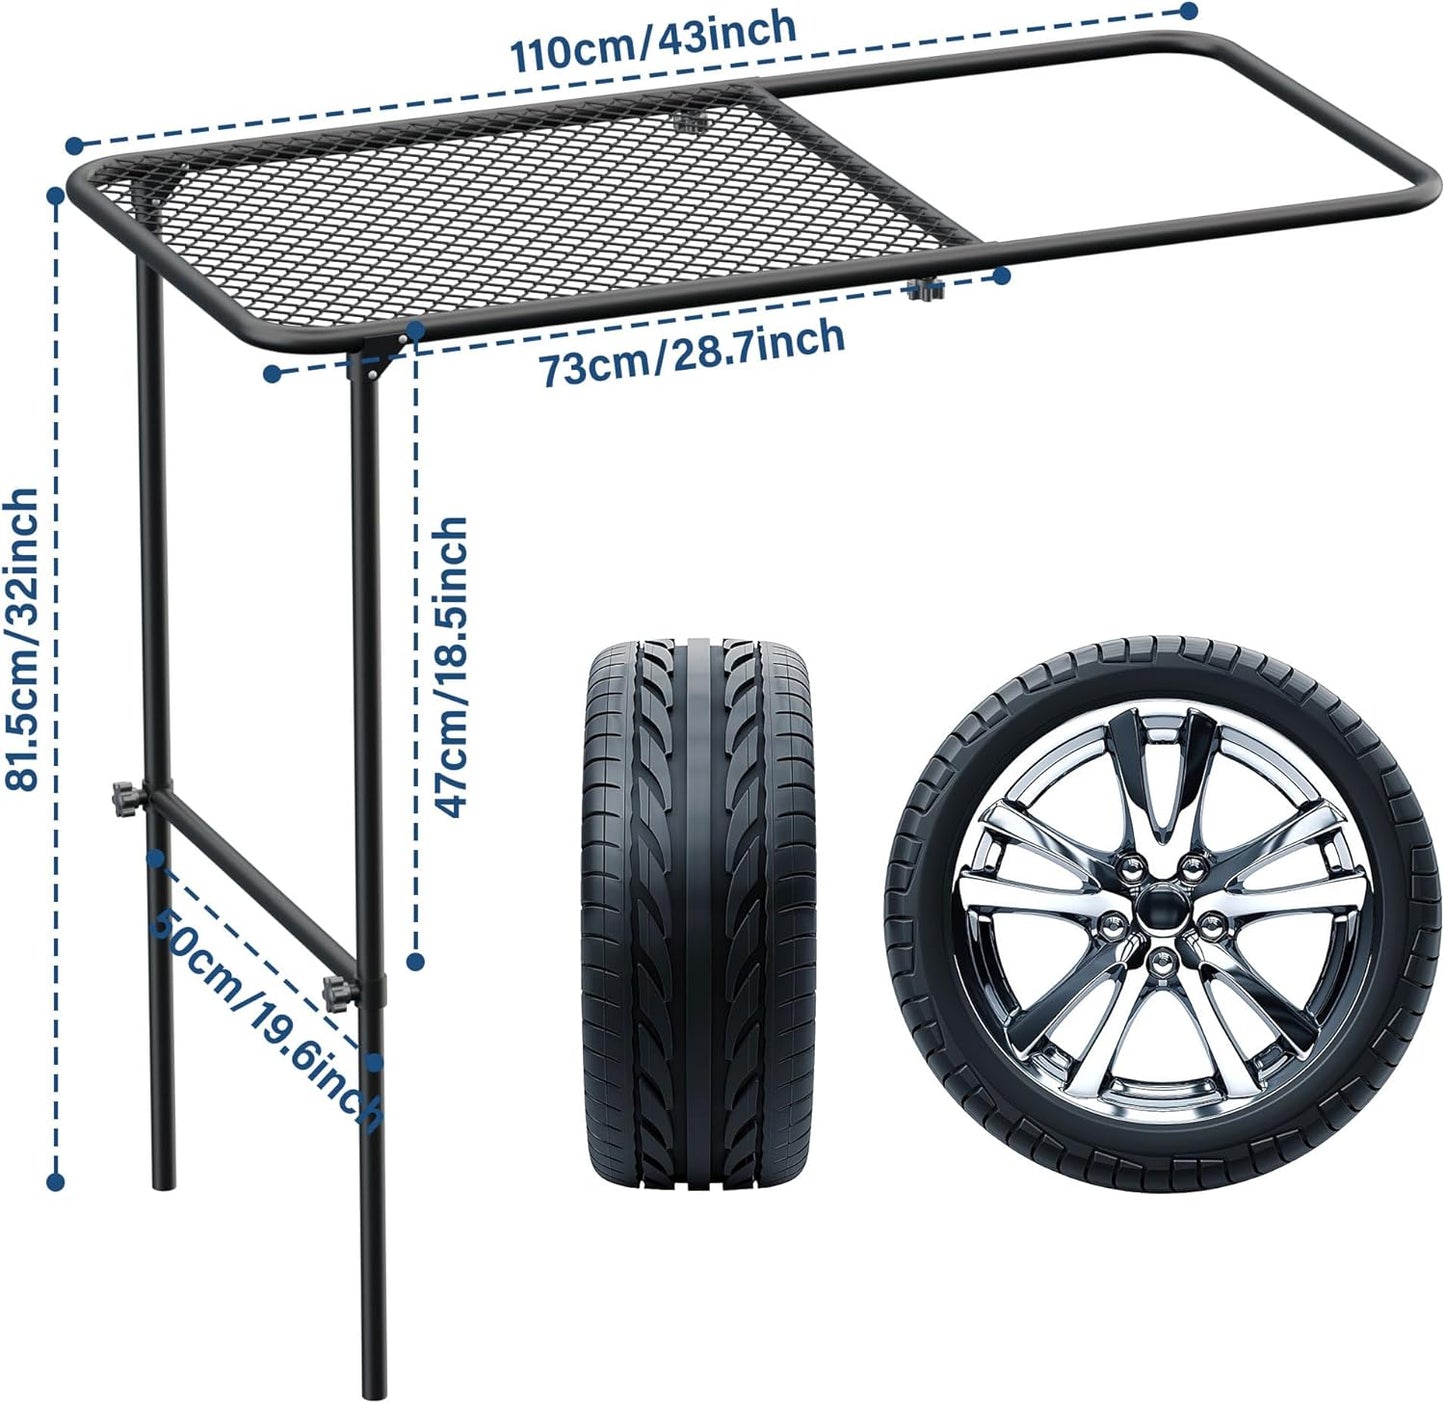 Diorssen Steel Tire Table, Adjustable,Your Essential Companion for Camping, Traveling, Tailgating and Outdoor Work, Stainless Steel for Off-Road Vehicles - Elegant Black, Large 30 x 20 x 2.9 inches